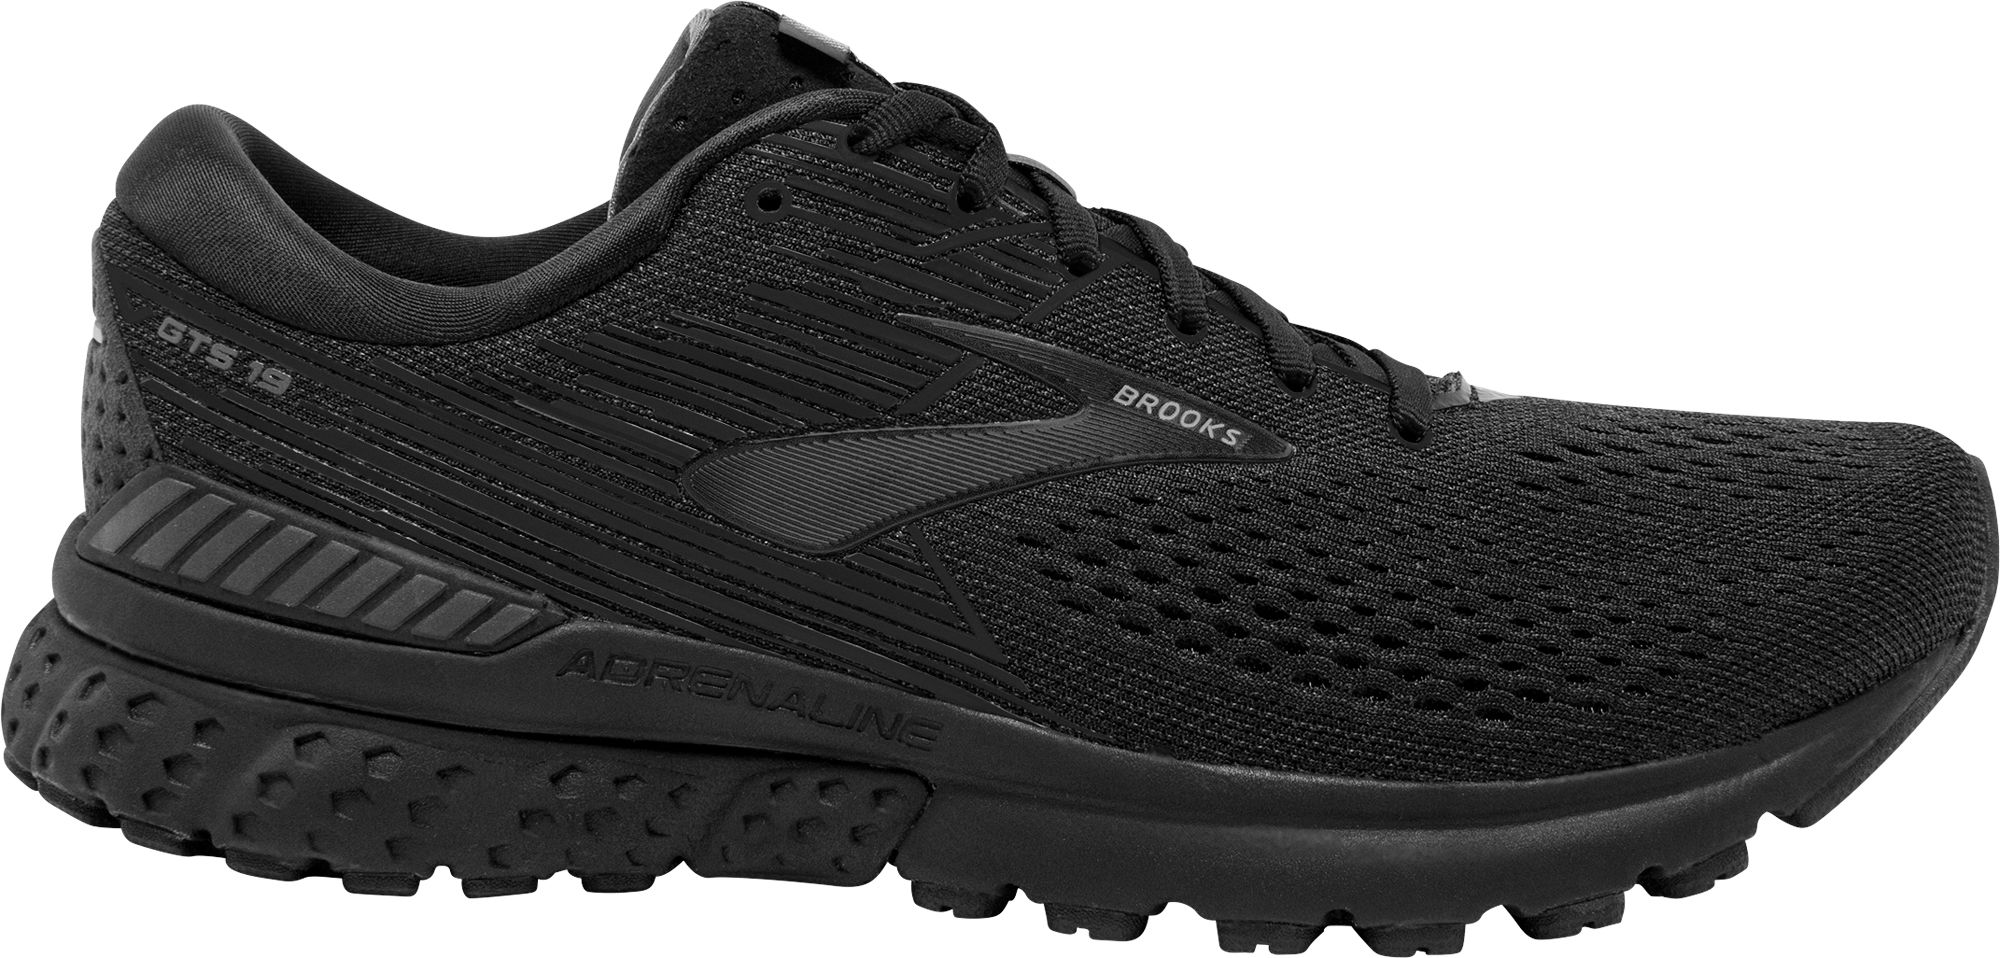 Black Brooks Shoes | DICK'S Sporting Goods